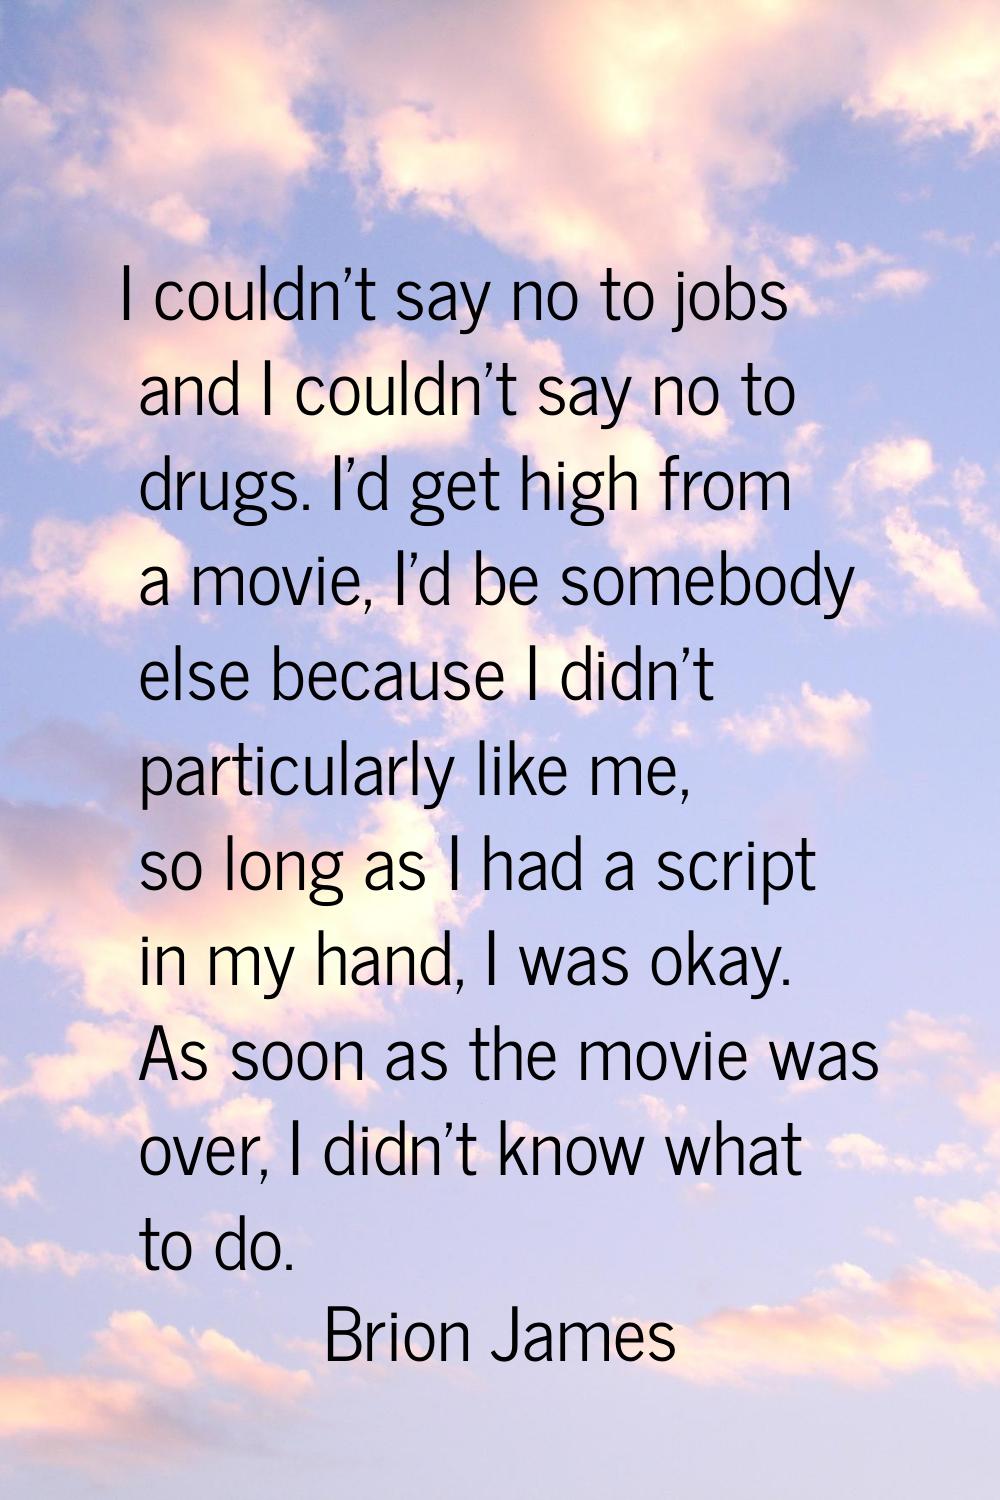 I couldn't say no to jobs and I couldn't say no to drugs. I'd get high from a movie, I'd be somebod